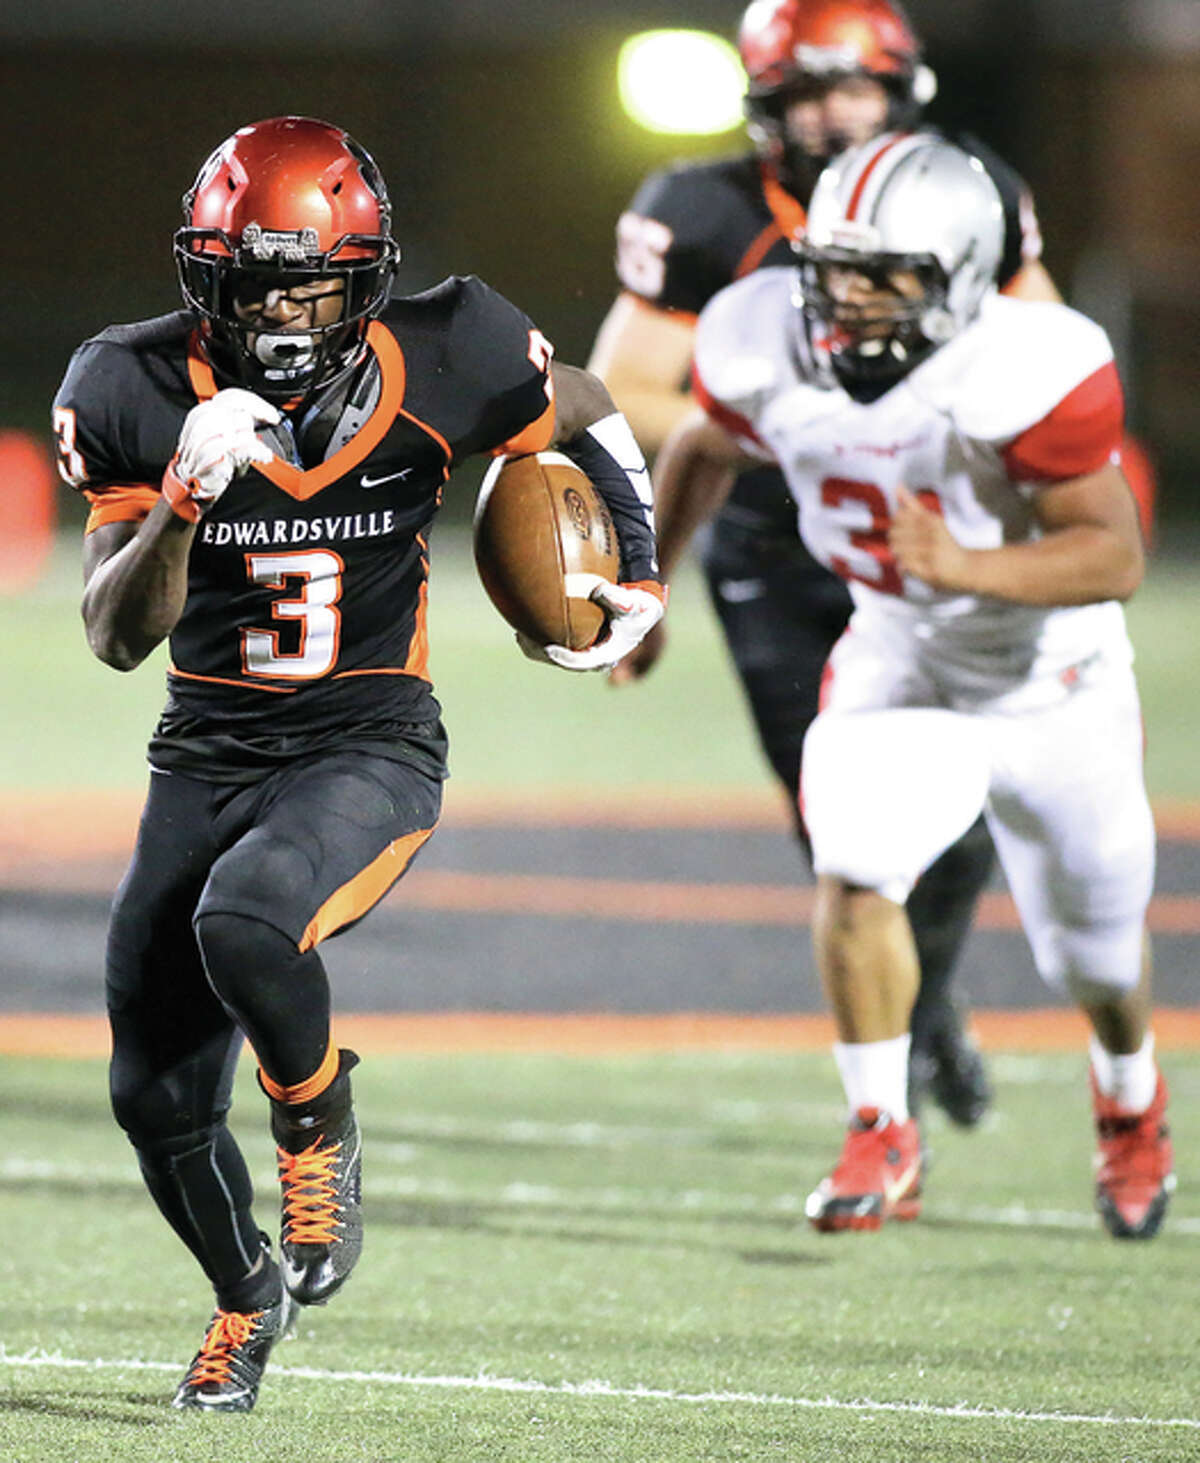 Edwardsville’s Kendell Davis (3) heads for the end zone on a touchdown during the second quarter against Alton last Friday at the District 7 Sports Complex in Edwardsville. The Tigers won 45-0 and head to Granite City on Friday looking to complete their seventh 9-0 regular season in the last 20 years.